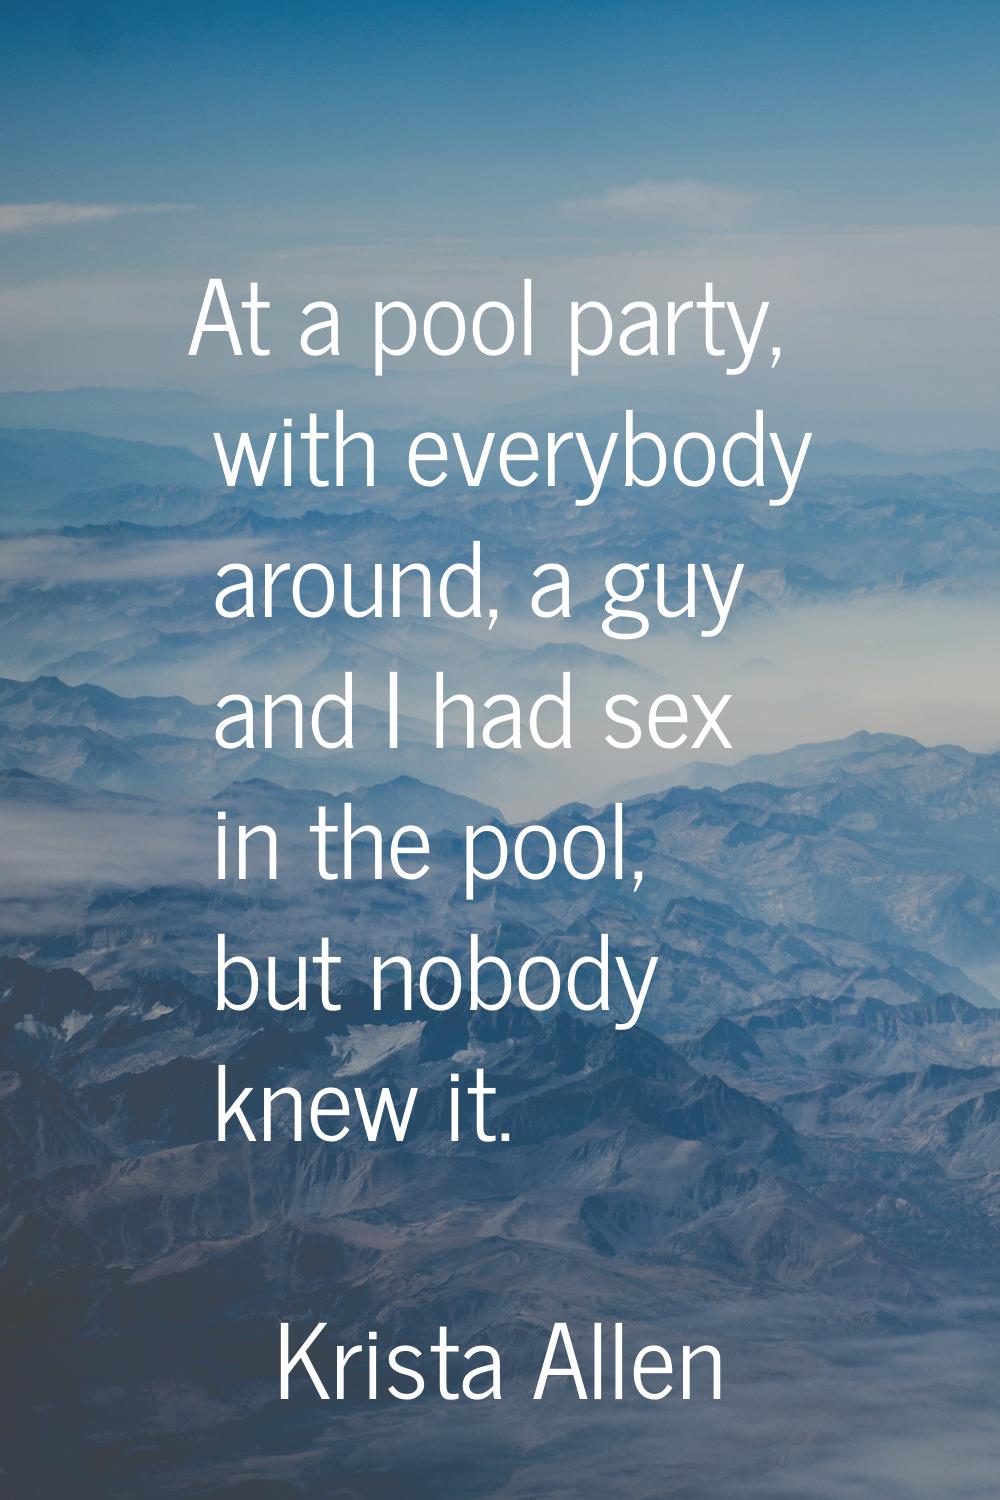 At a pool party, with everybody around, a guy and I had sex in the pool, but nobody knew it.